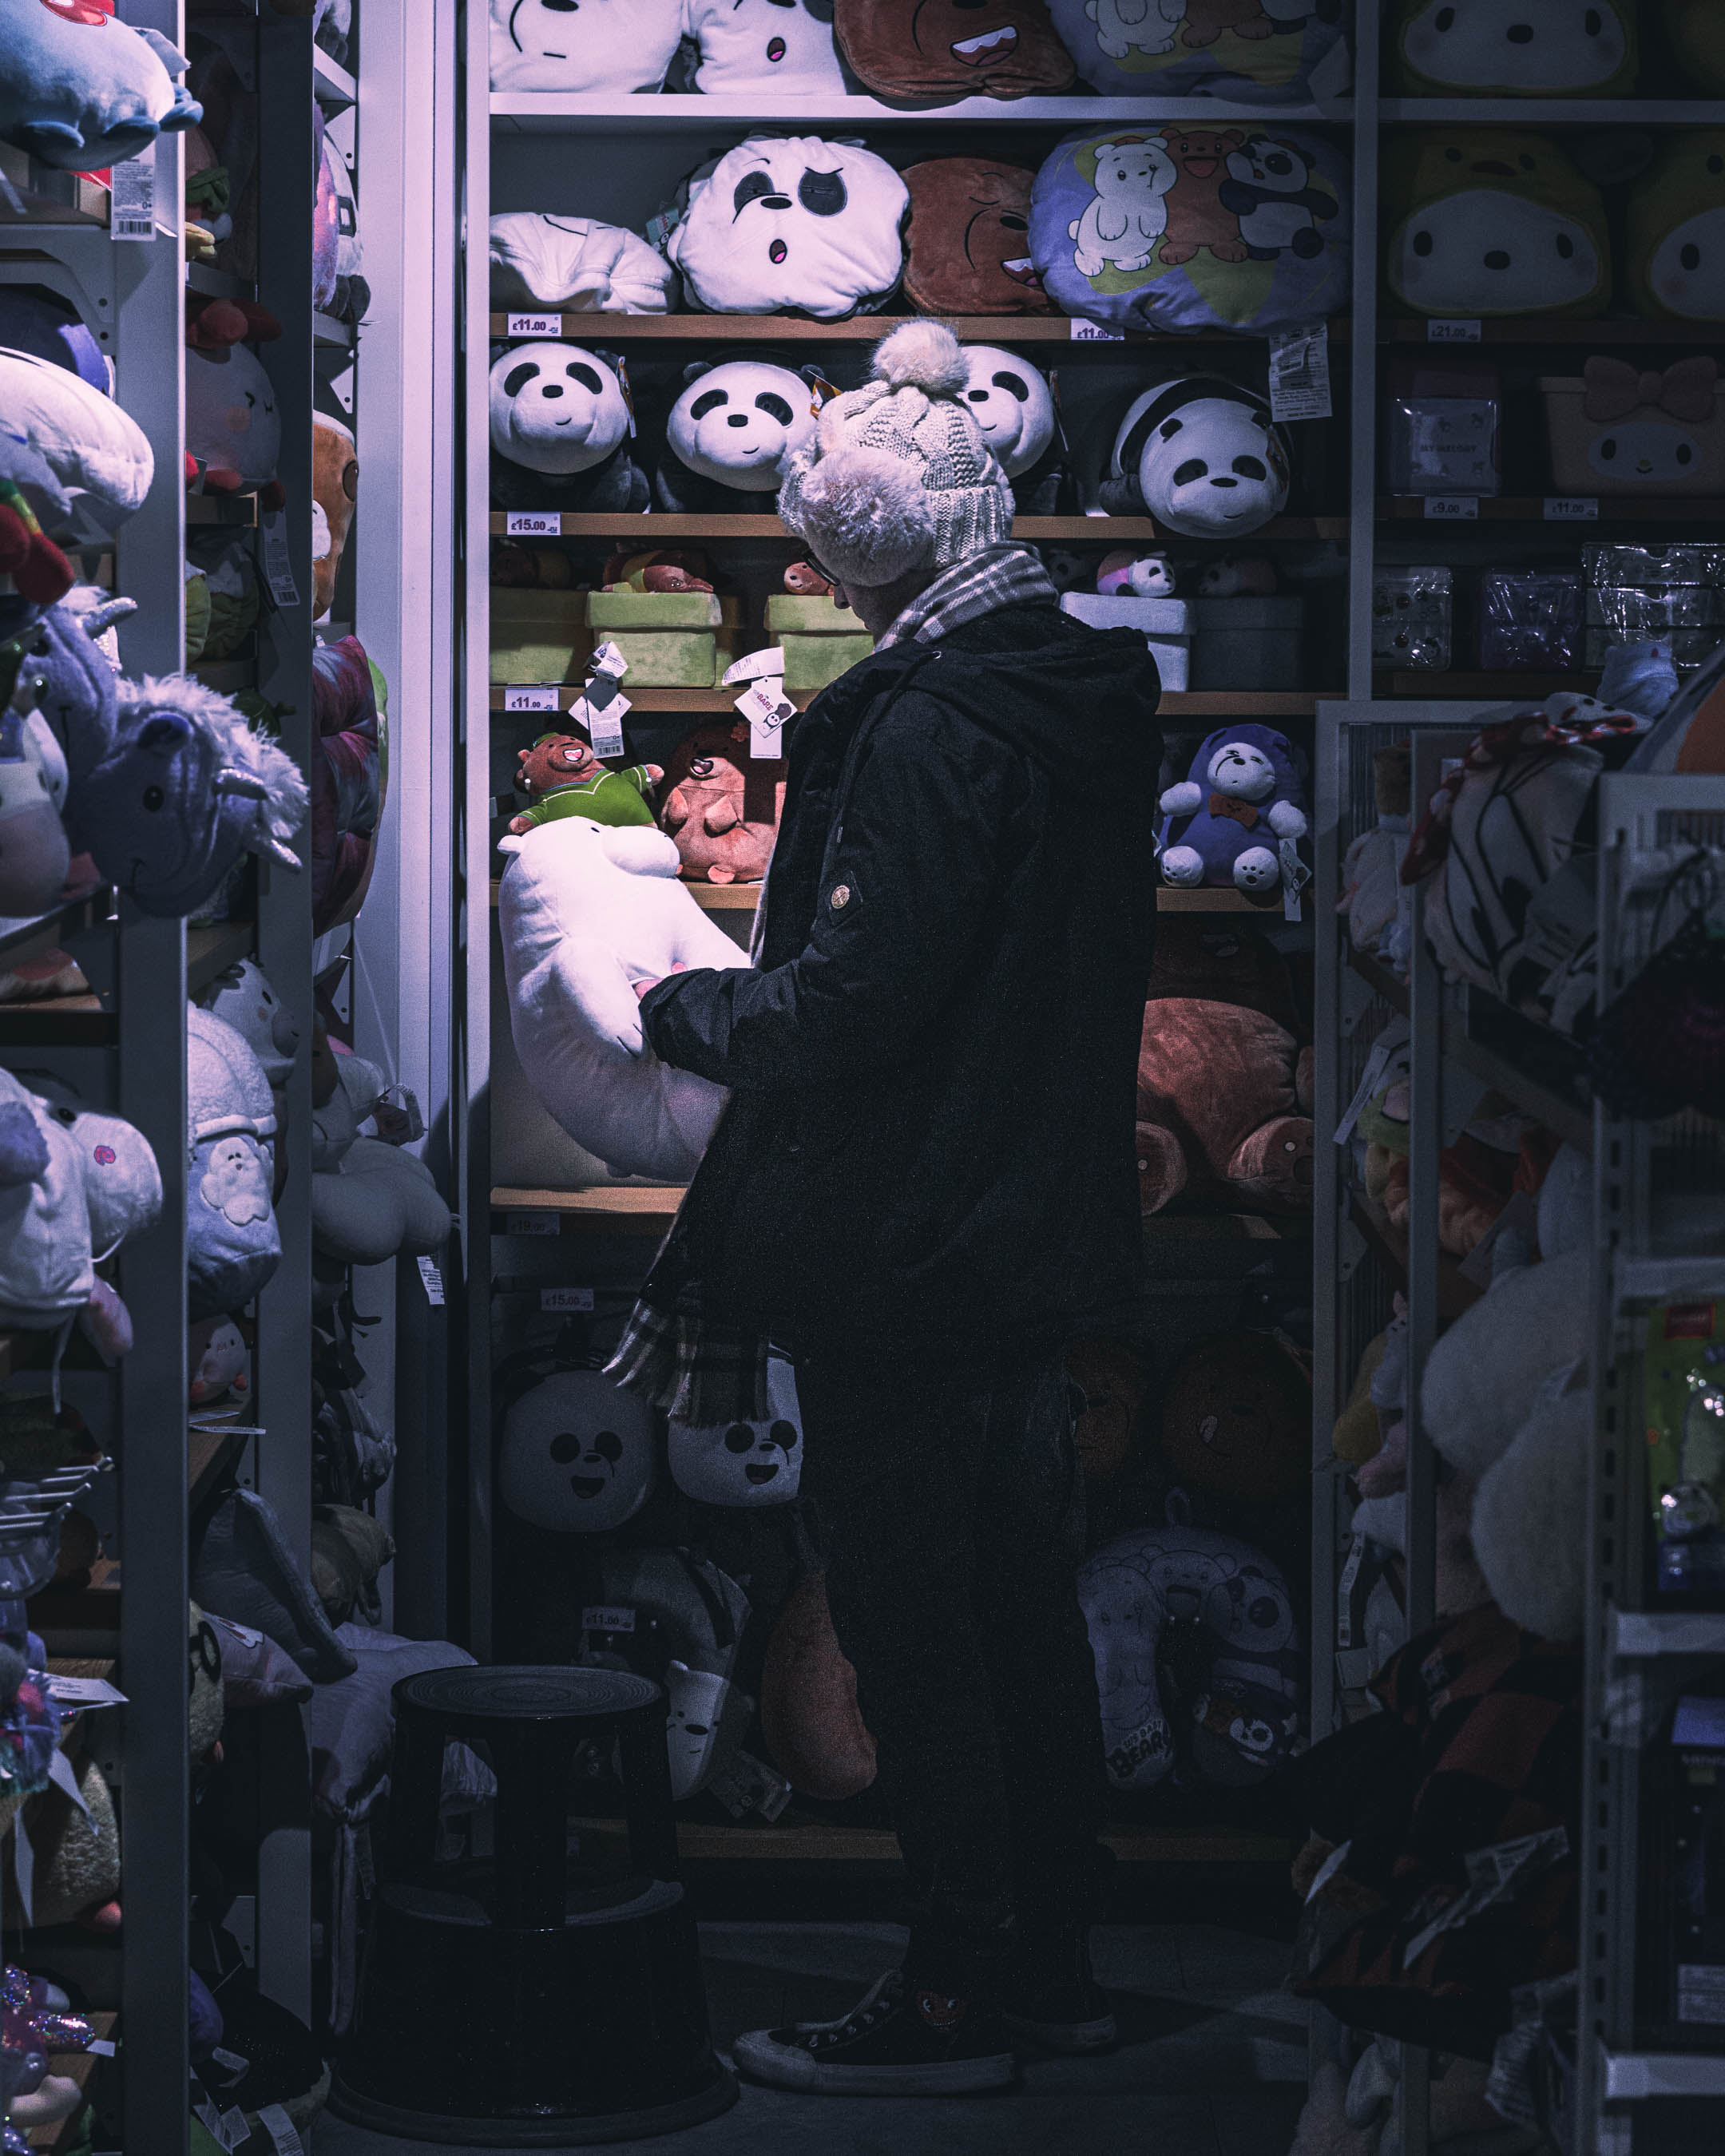 Photograph of a man standing in the corner of a Miniso store clutching a white bear.